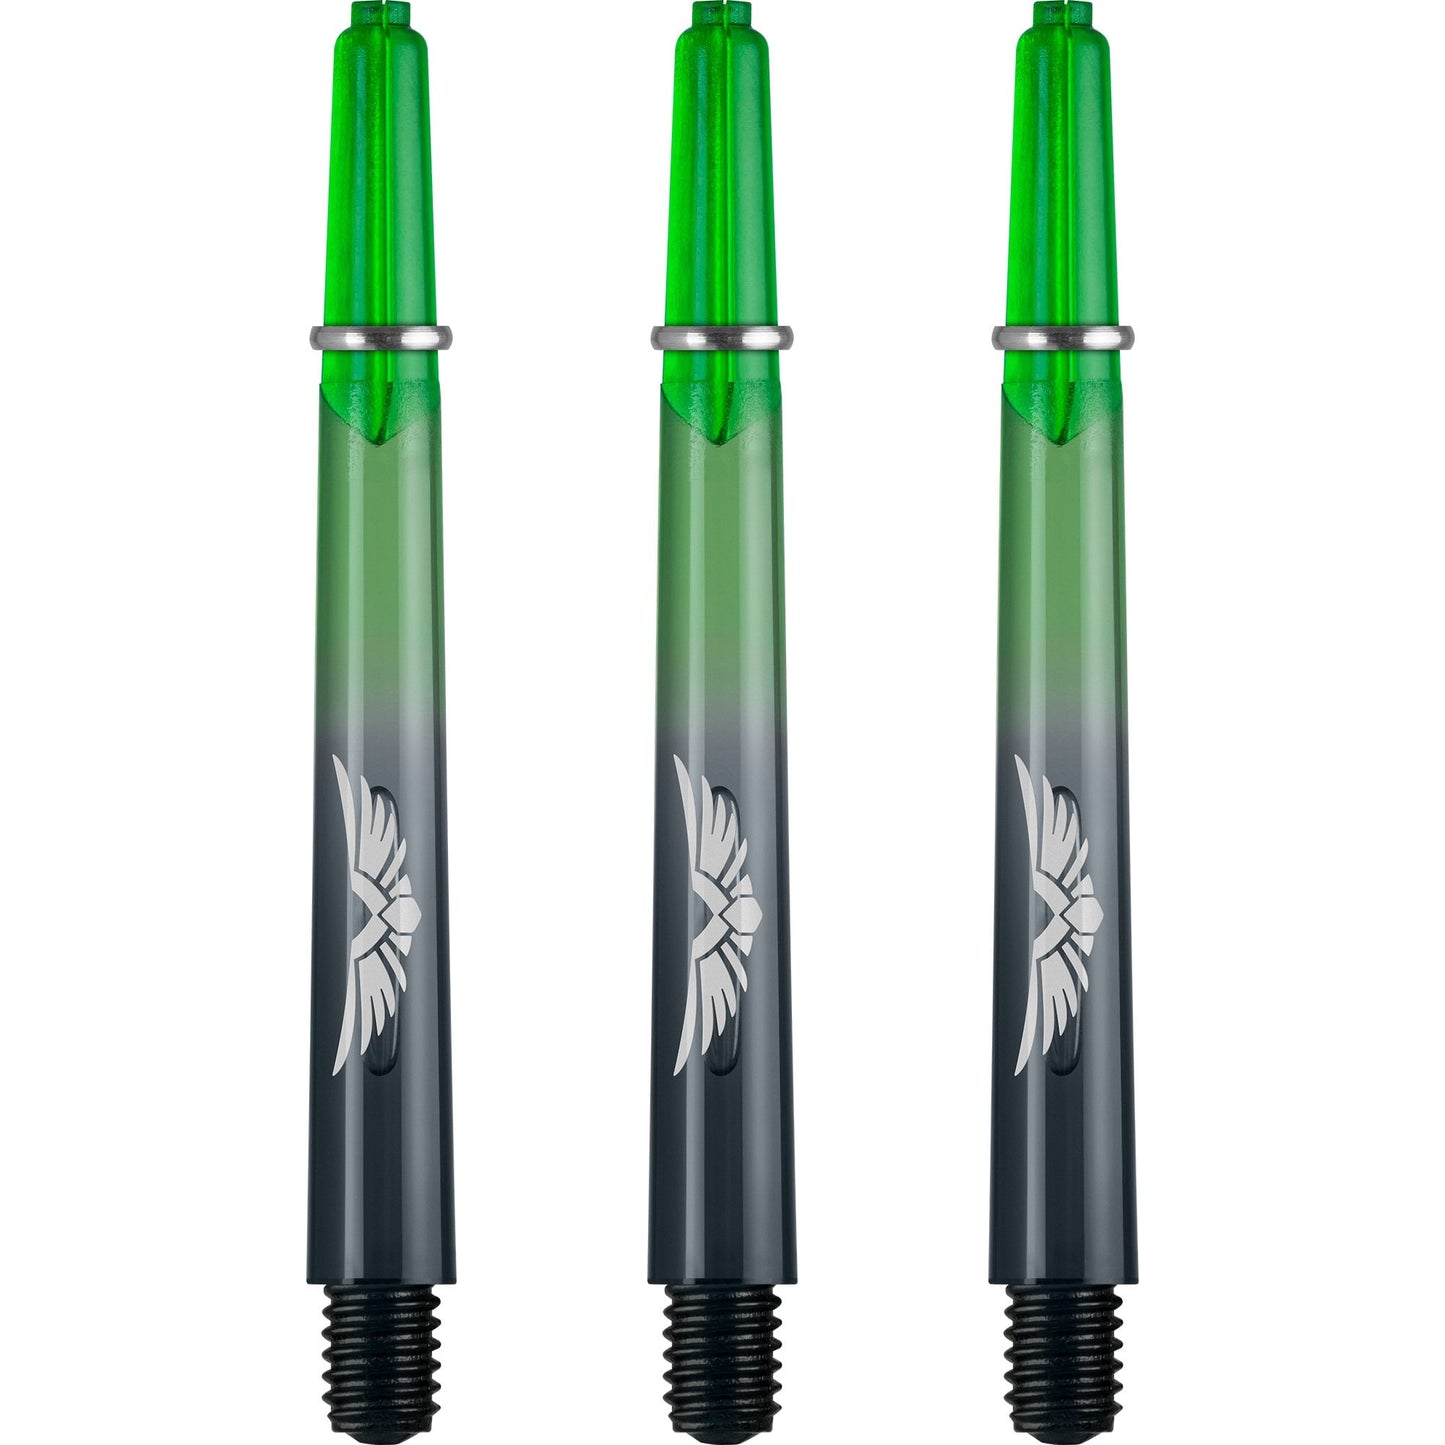 Shot Eagle Claw Dart Shafts - with Machined Rings - Strong Polycarbonate Stems - Black Green Medium